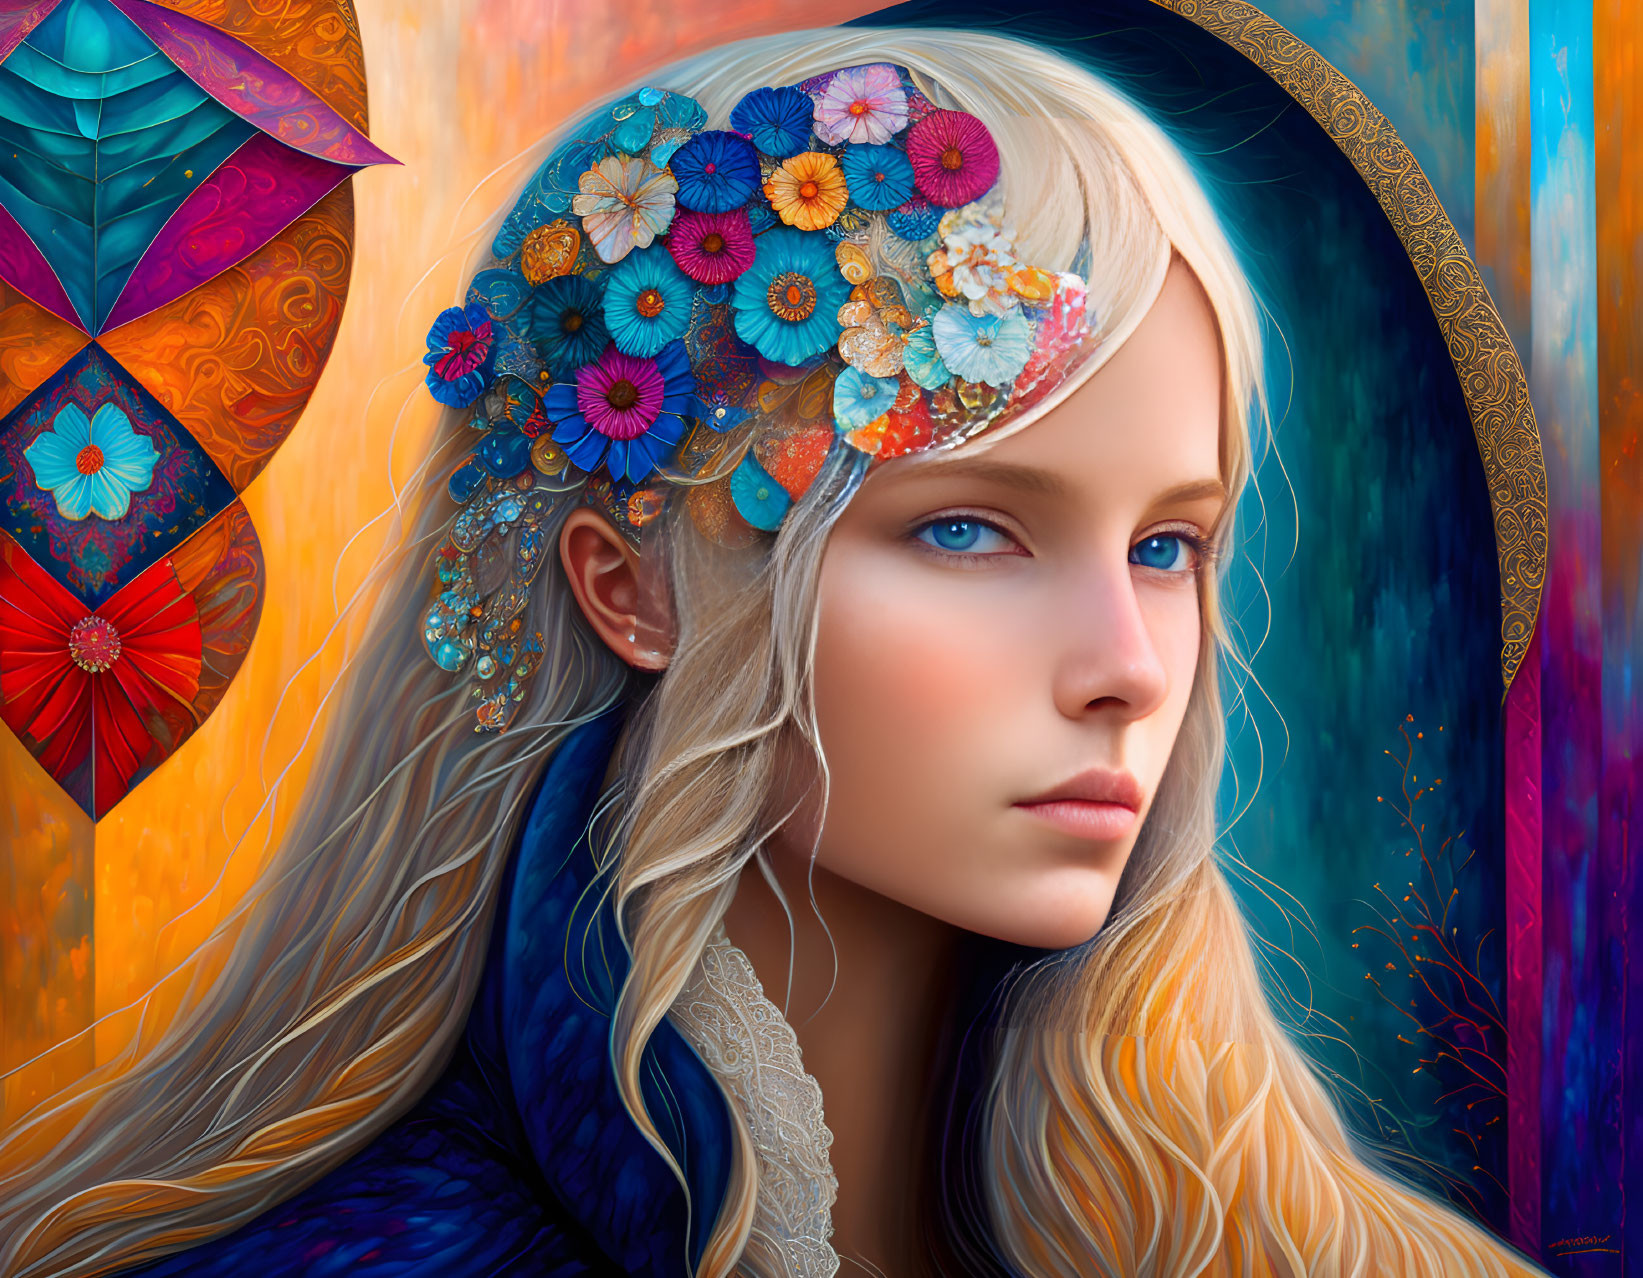 Digital portrait of woman with blue eyes and blonde hair in vibrant floral headpiece on colorful abstract background